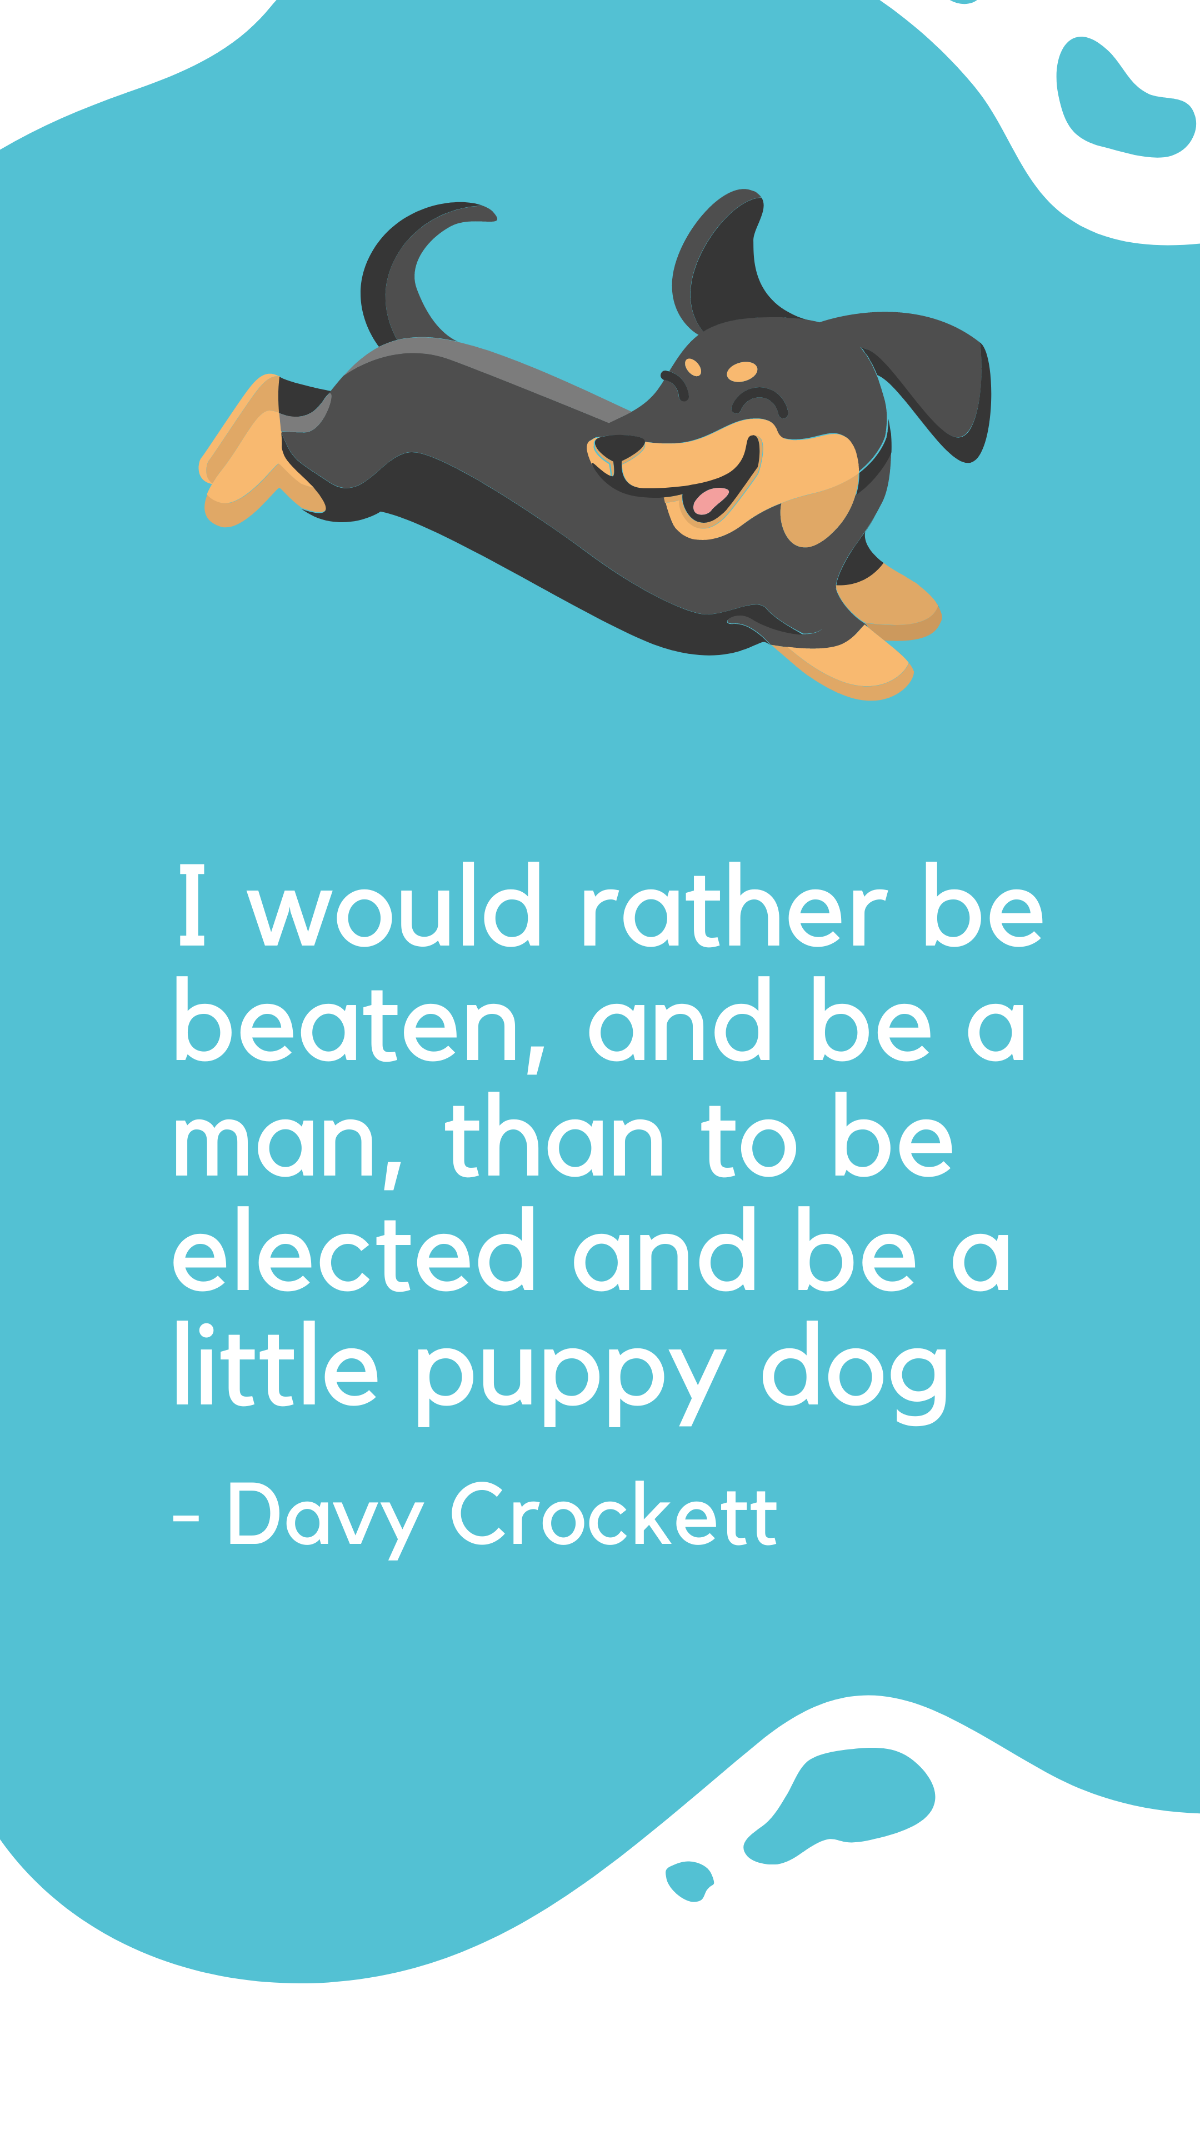 Davy Crockett - I would rather be beaten, and be a man, than to be elected and be a little puppy dog